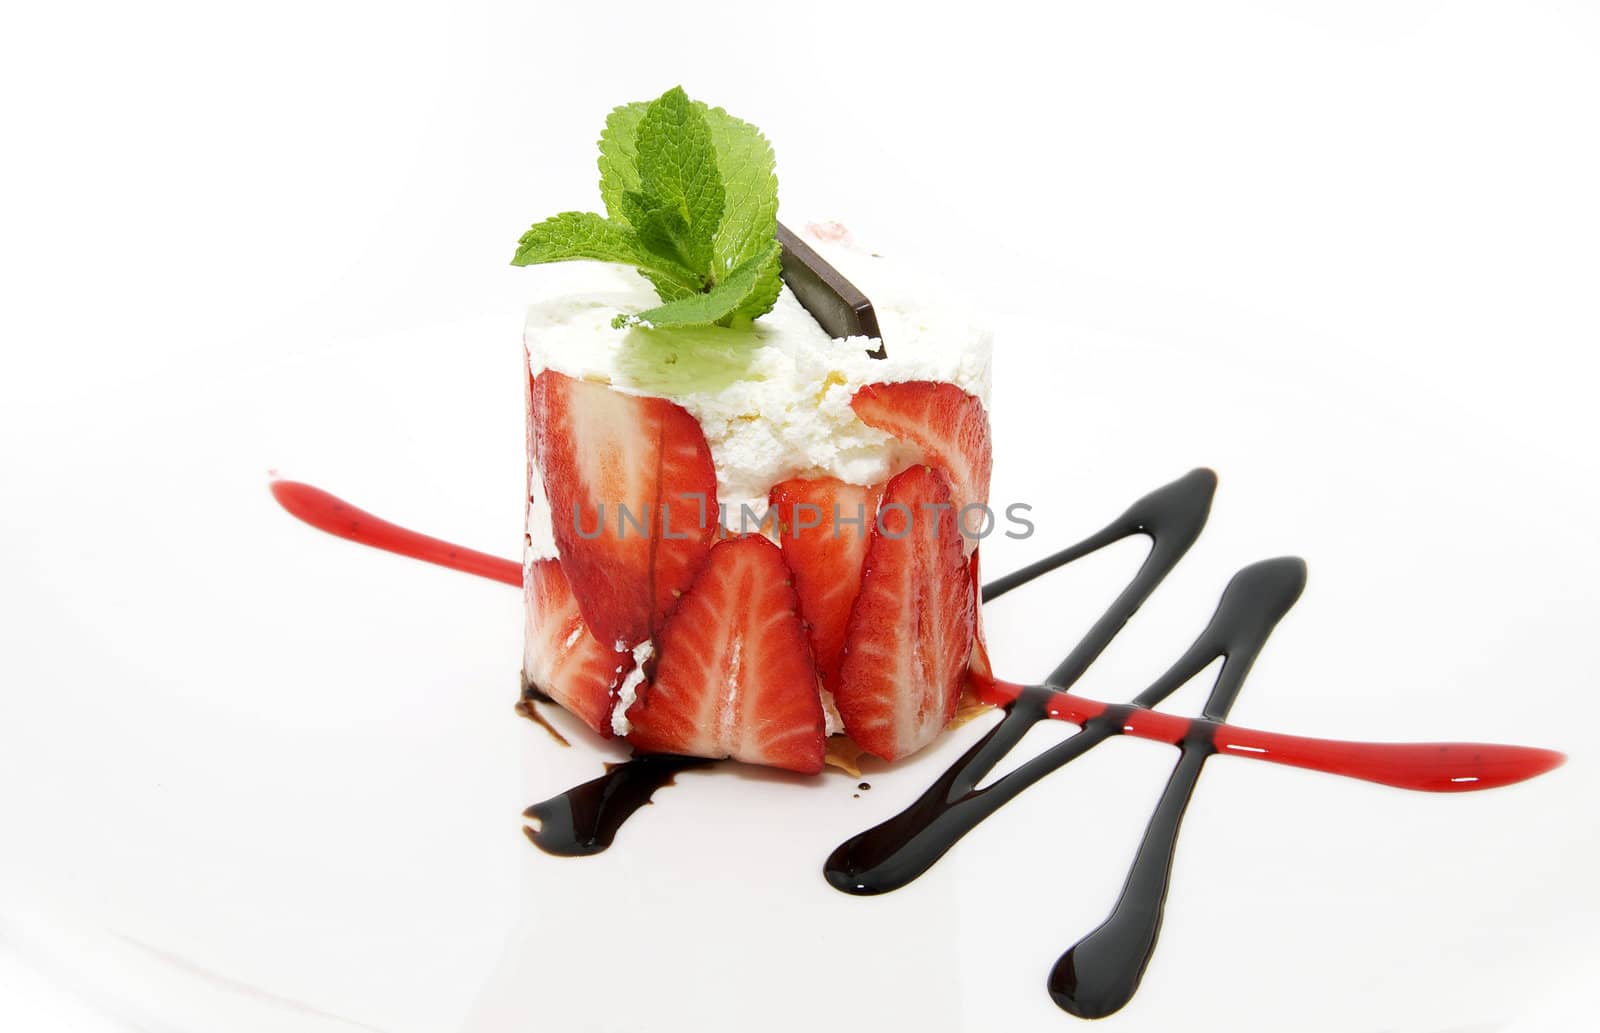 Strawberry dessert decorated with mint and chocolate cream